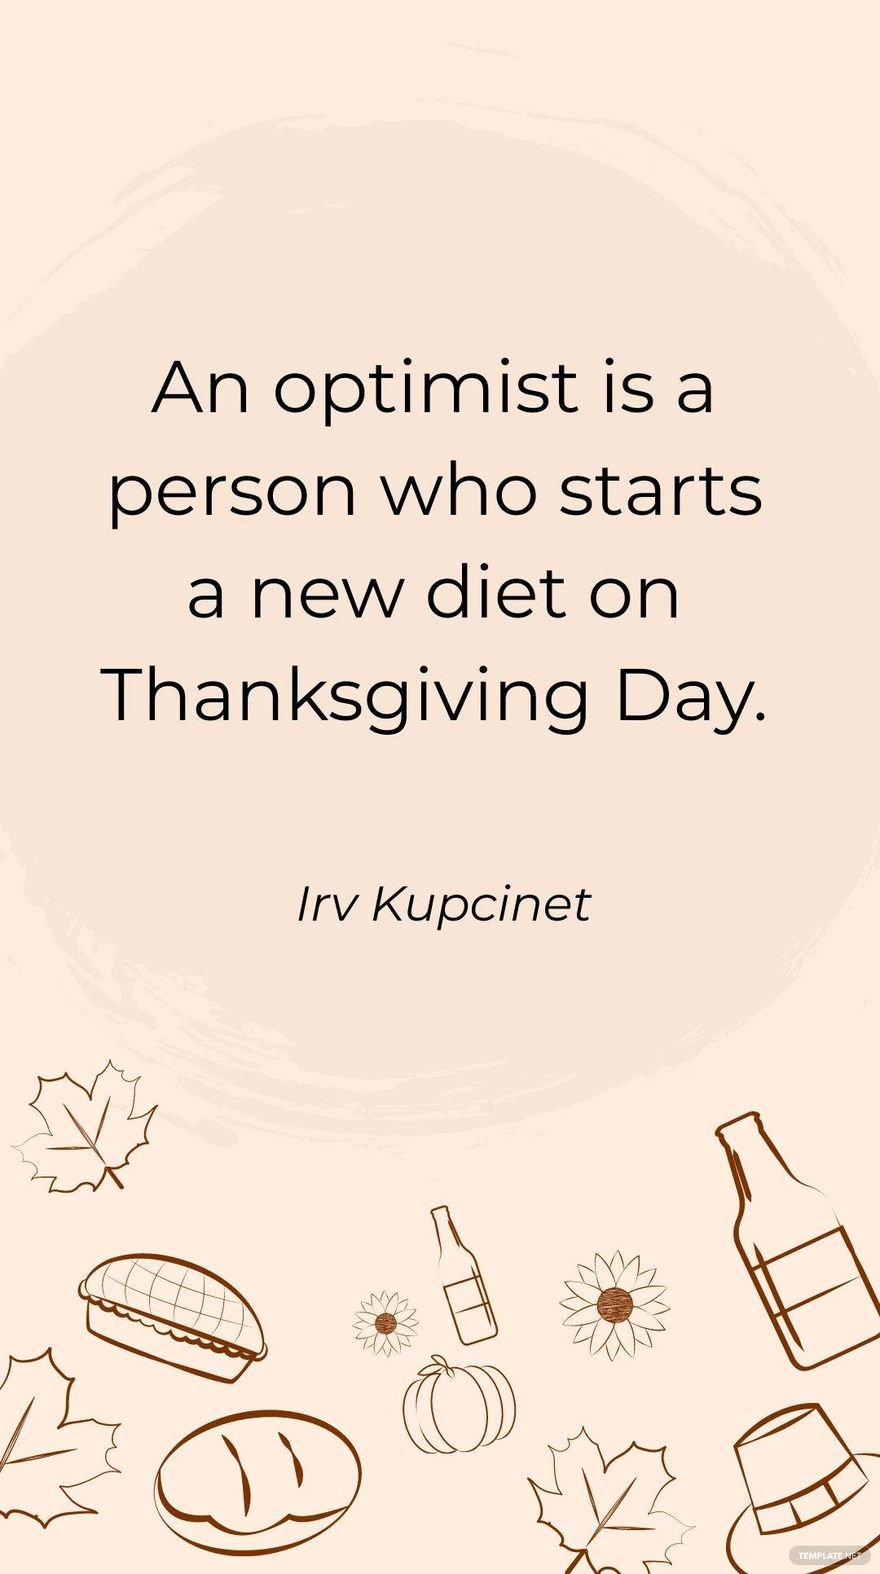 Irv Kupcinet - An optimist is a person who starts a new diet on Thanksgiving Day.